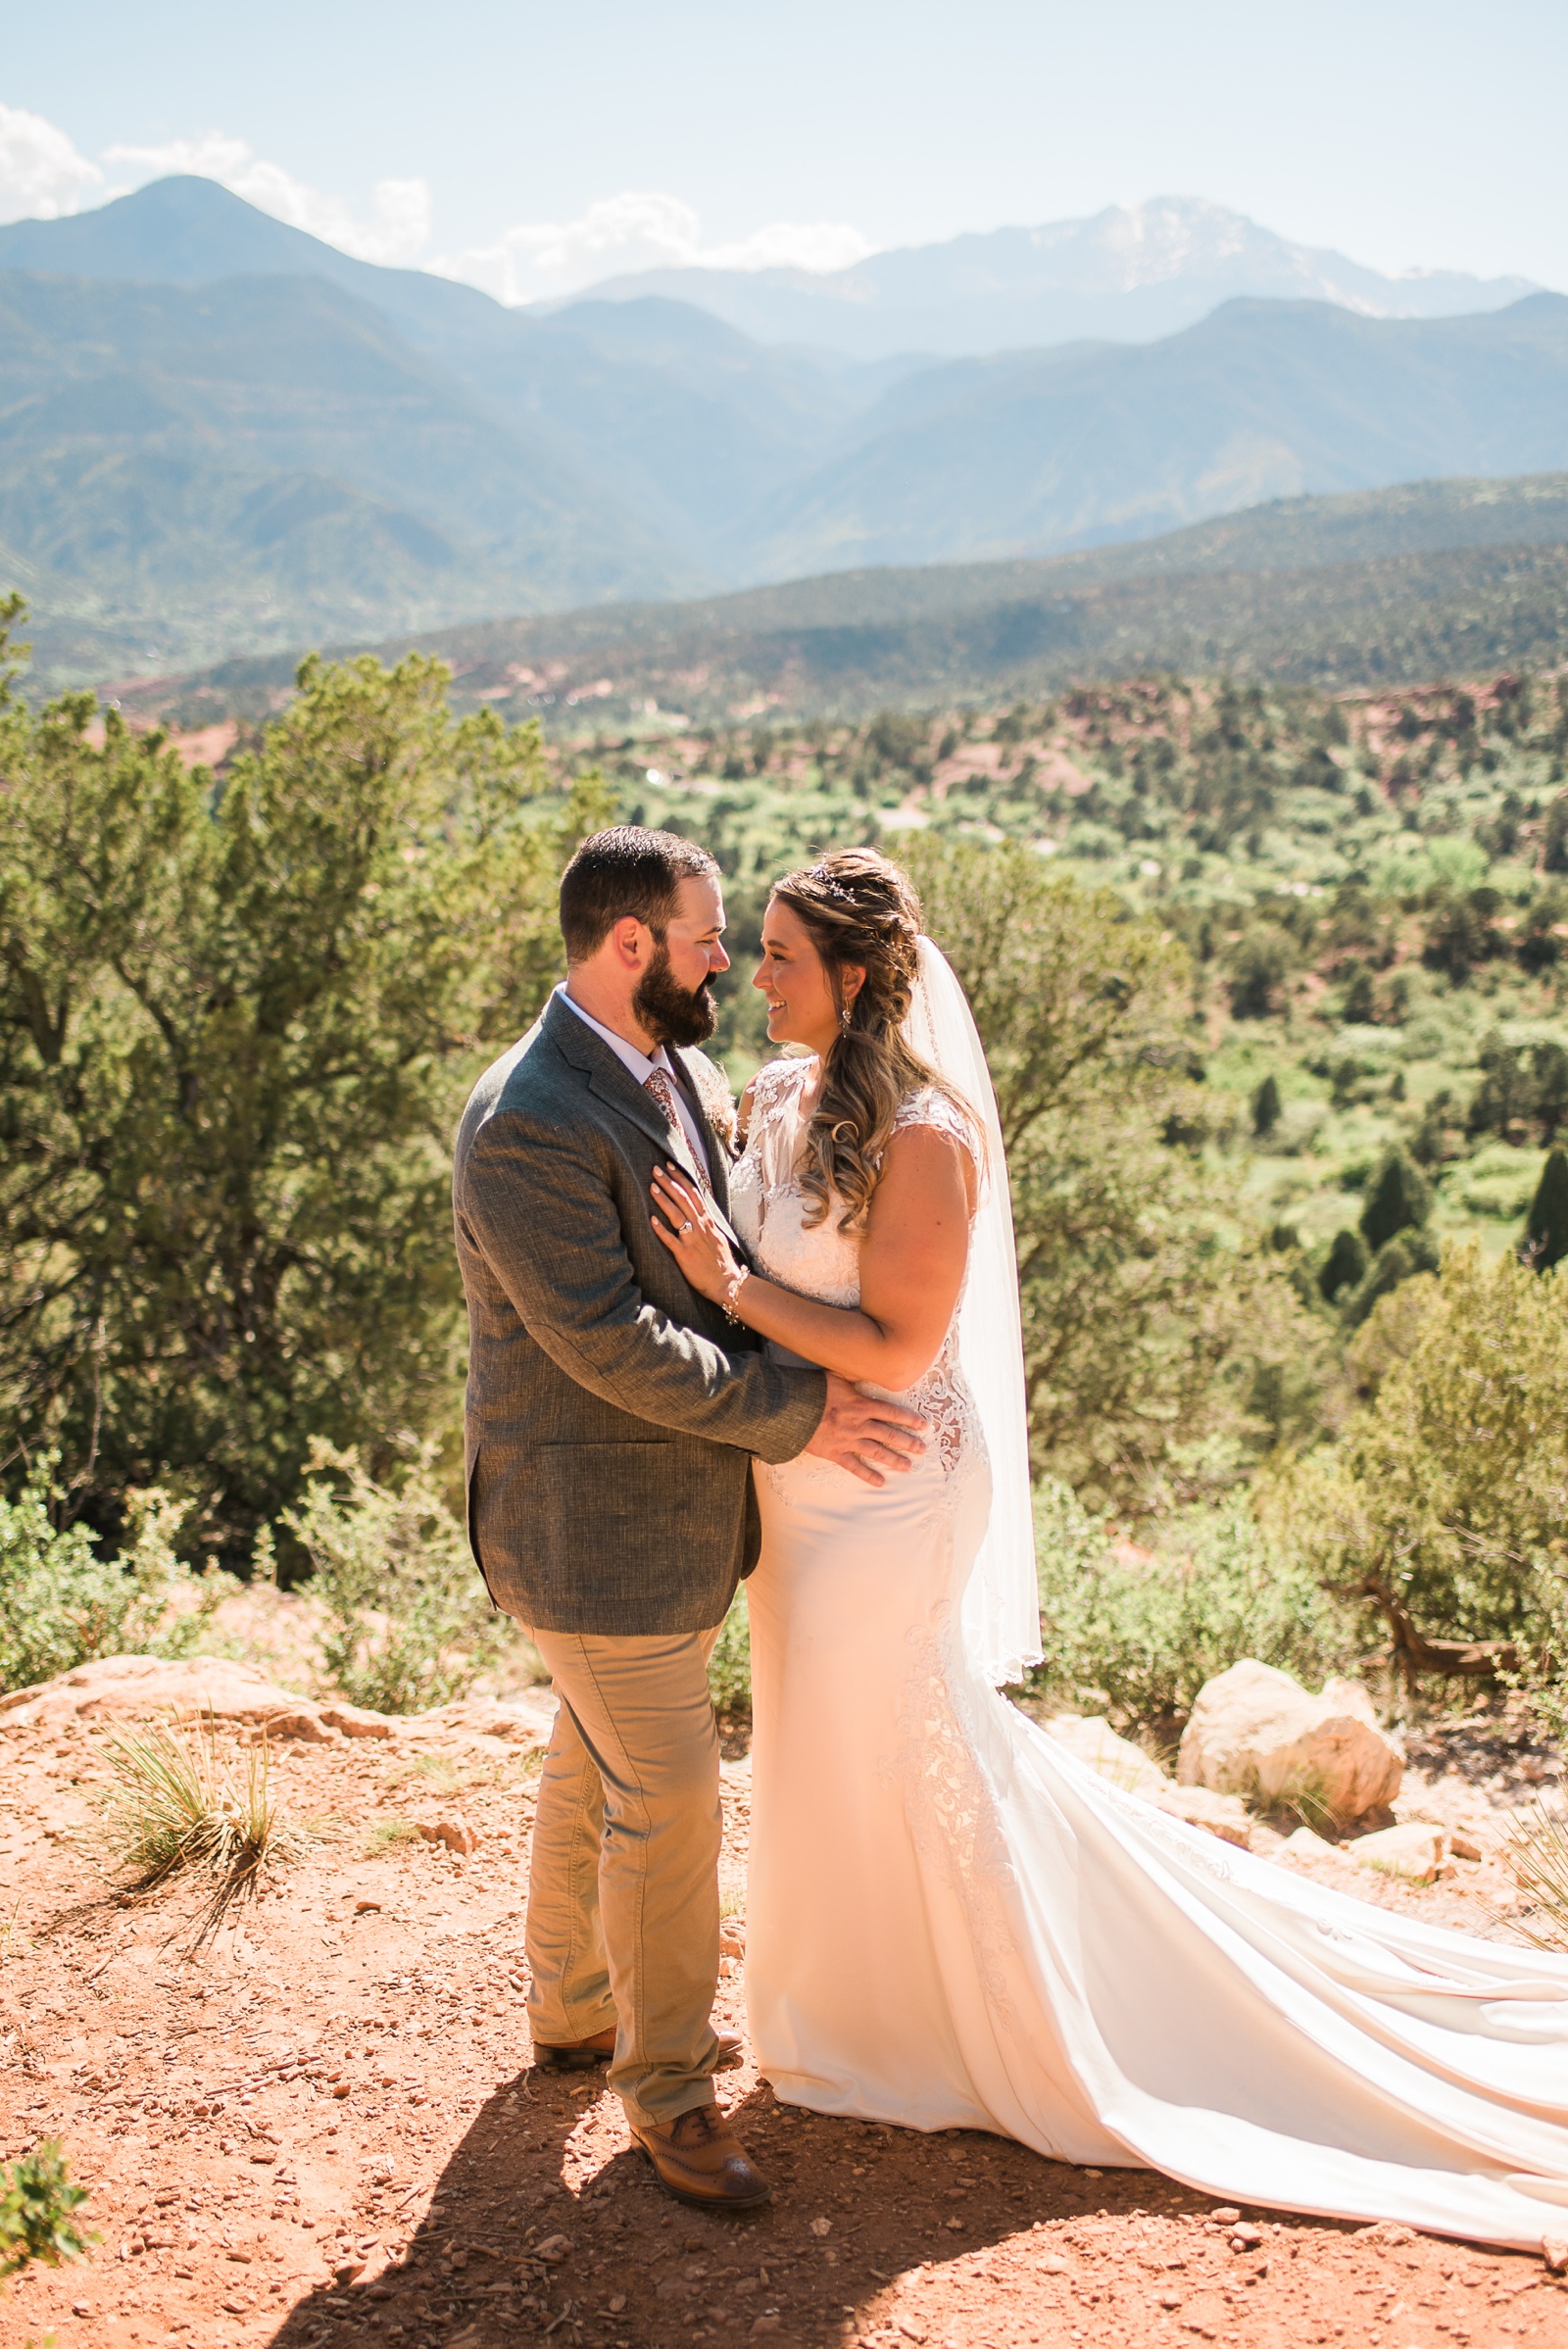 Bride and groom at garden of the gods